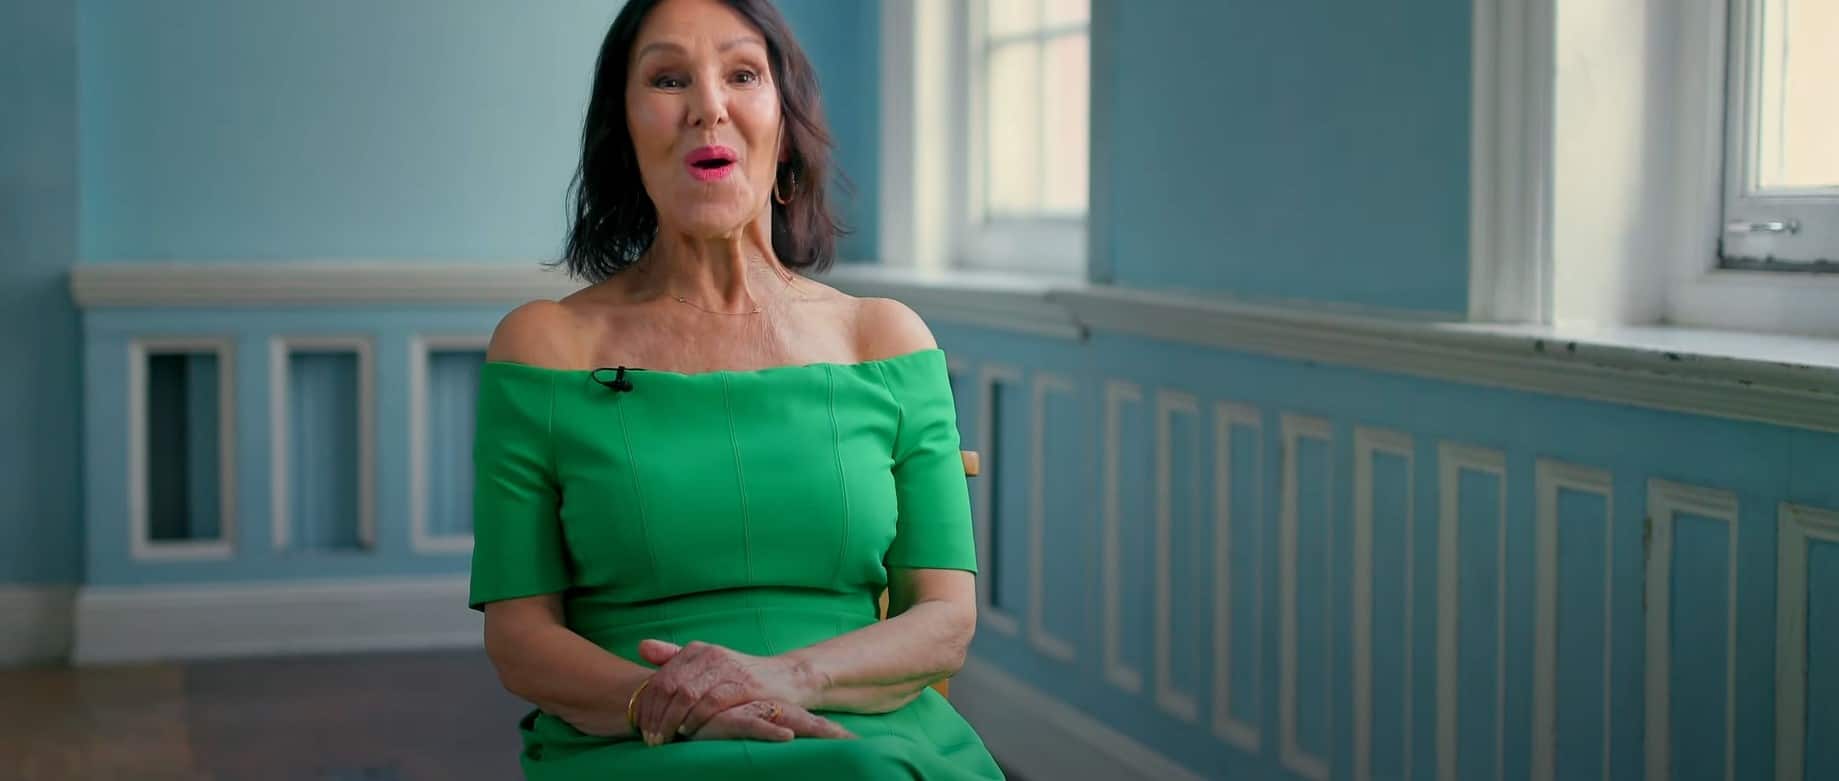 Why Did Arlene Phillips Leave Strictly?